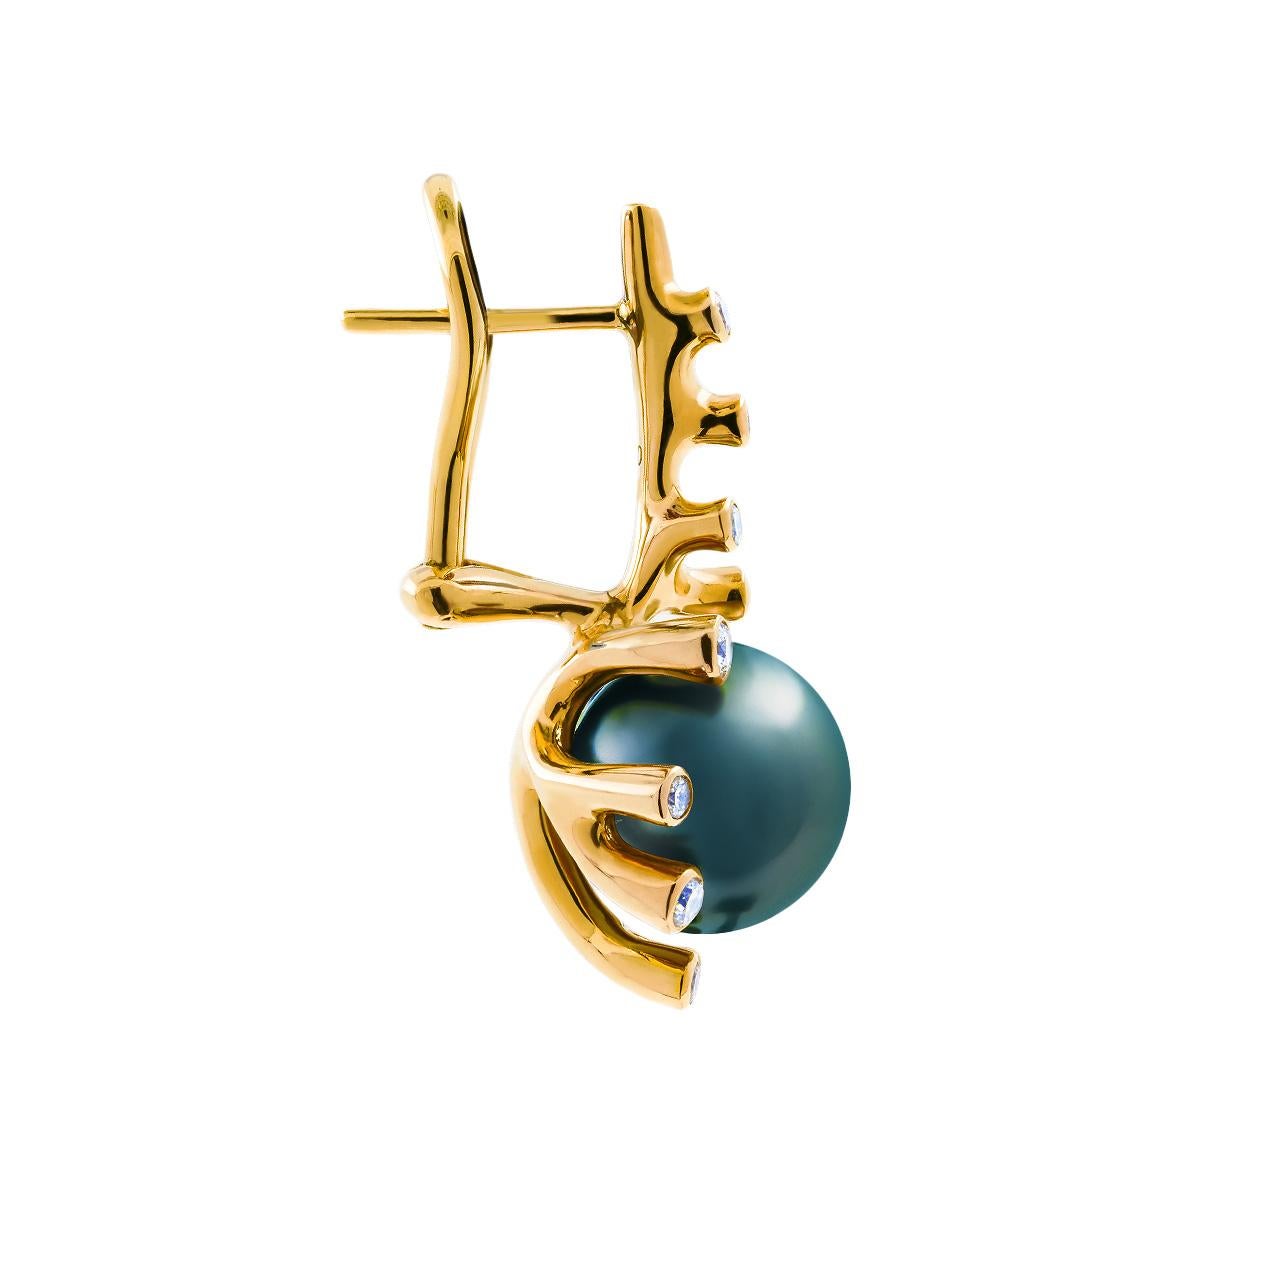 - 24 Round Diamonds - 0.40 ct, E-F/VS
- 9-9.5 mm Dark Tahitian pearl
- 18K Yellow Gold 
- Weight: 9.98 g
This pair of earrings from the Corals collection of Jewellery Theatre features two lustrous Dark Tahitian pearls surrounded with gold corals